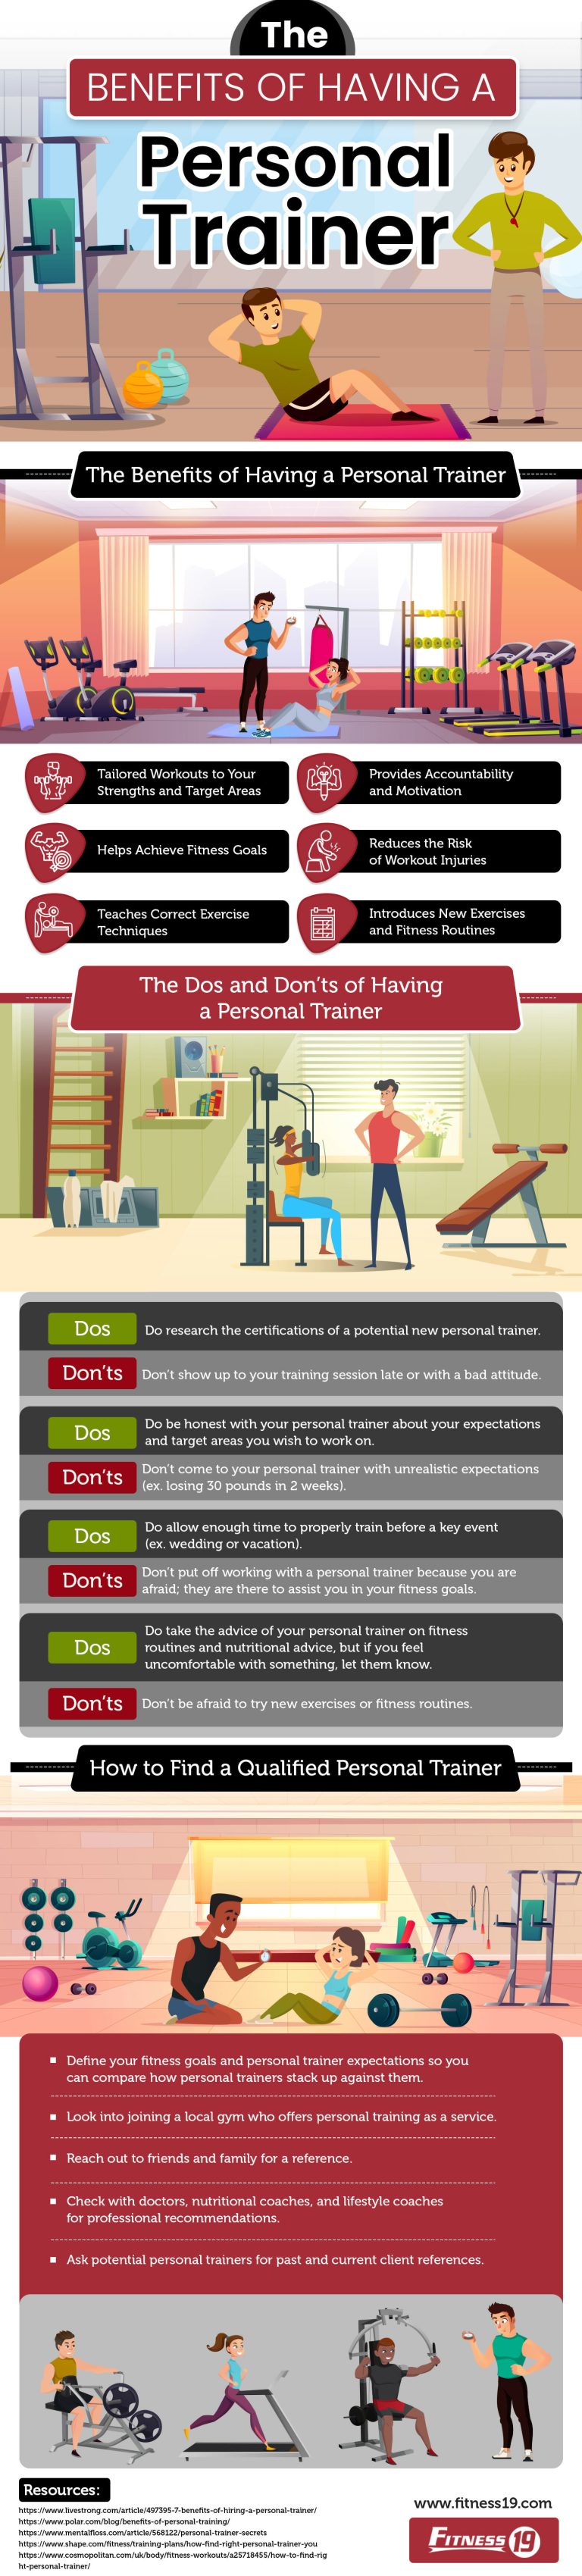 The-Benefits-of-Having-a-Personal-Trainer